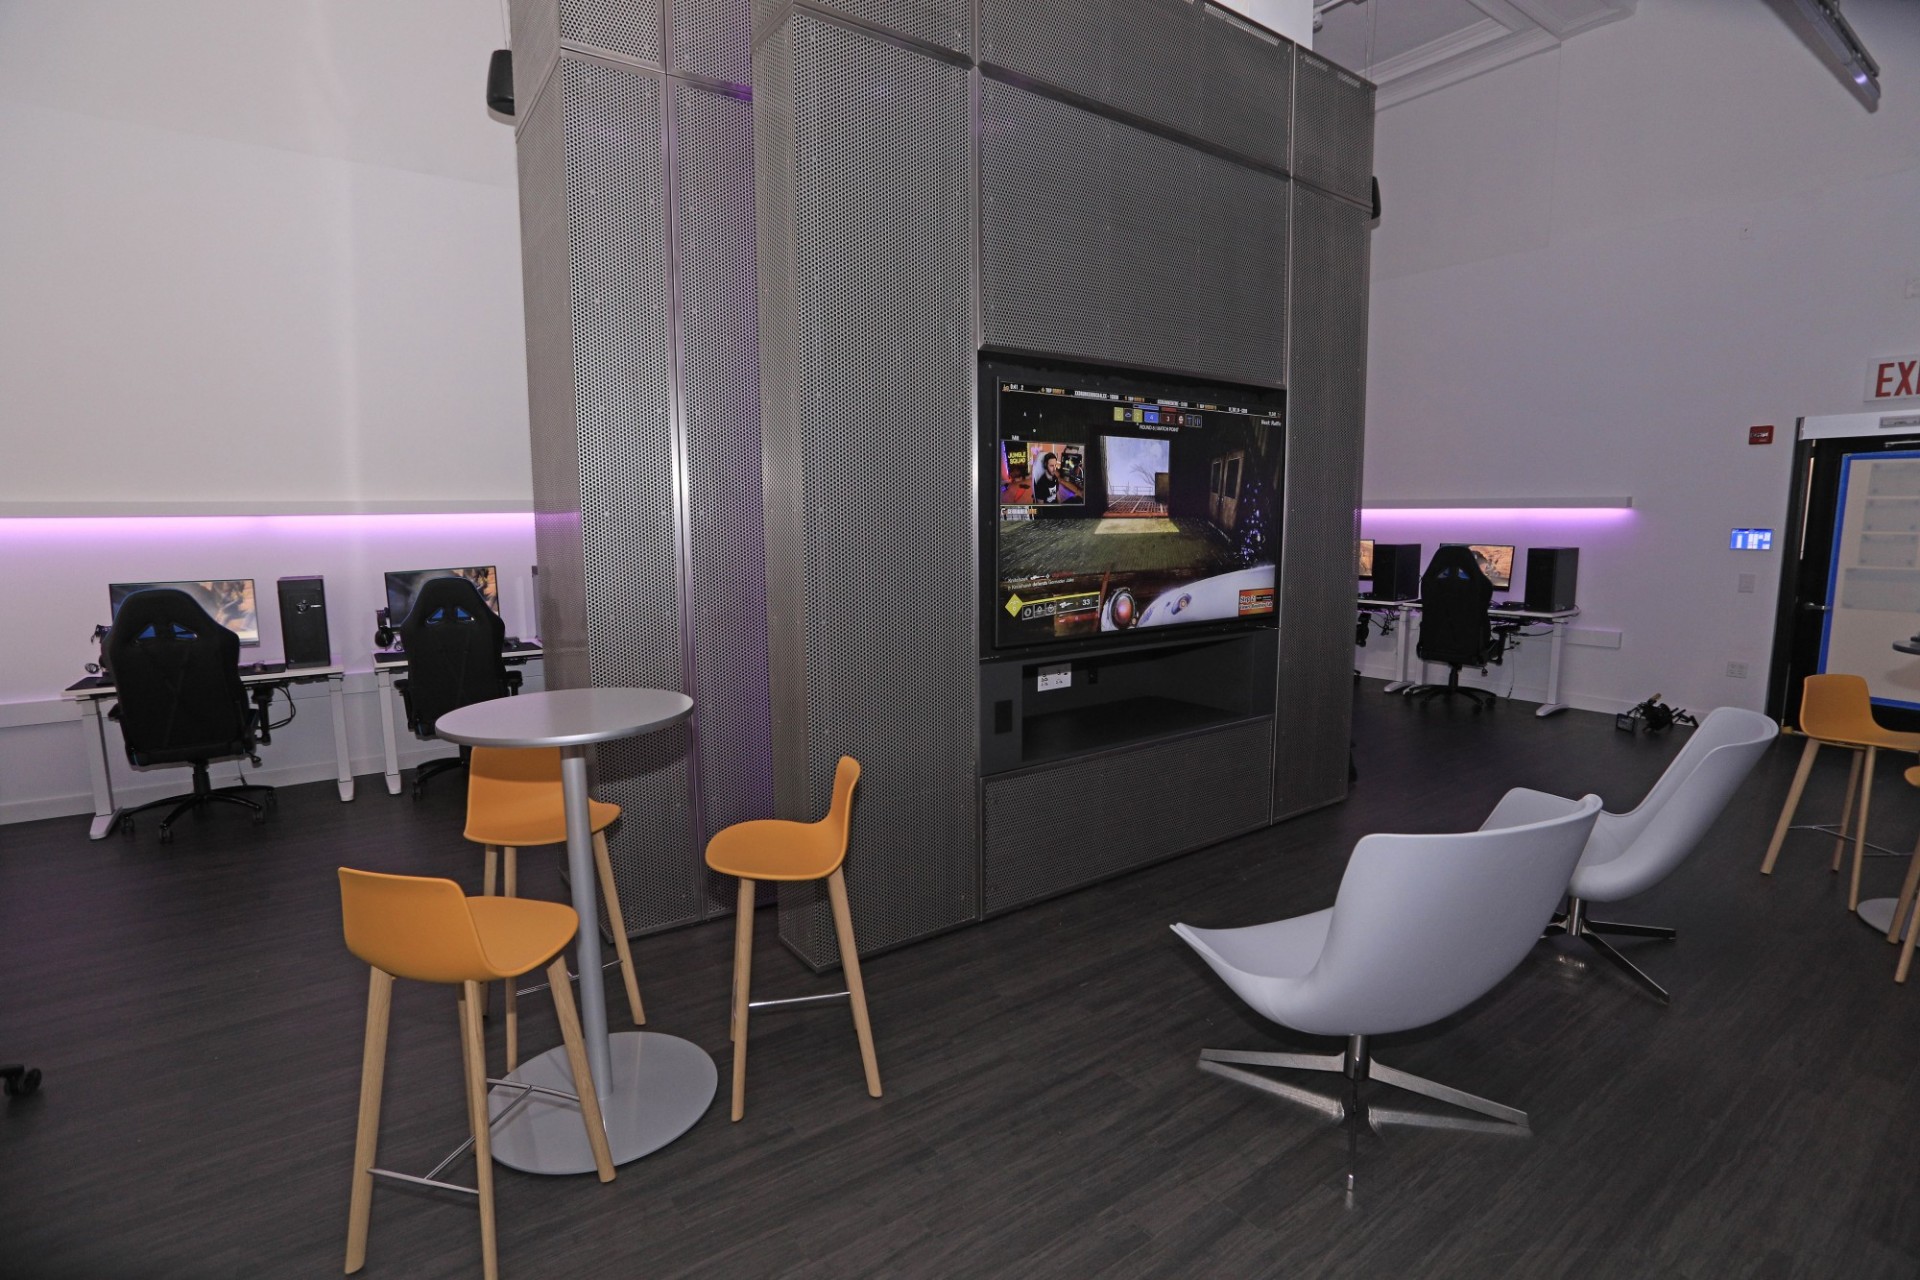 The room features individual and group gaming stations. Photo by Michael DiVito